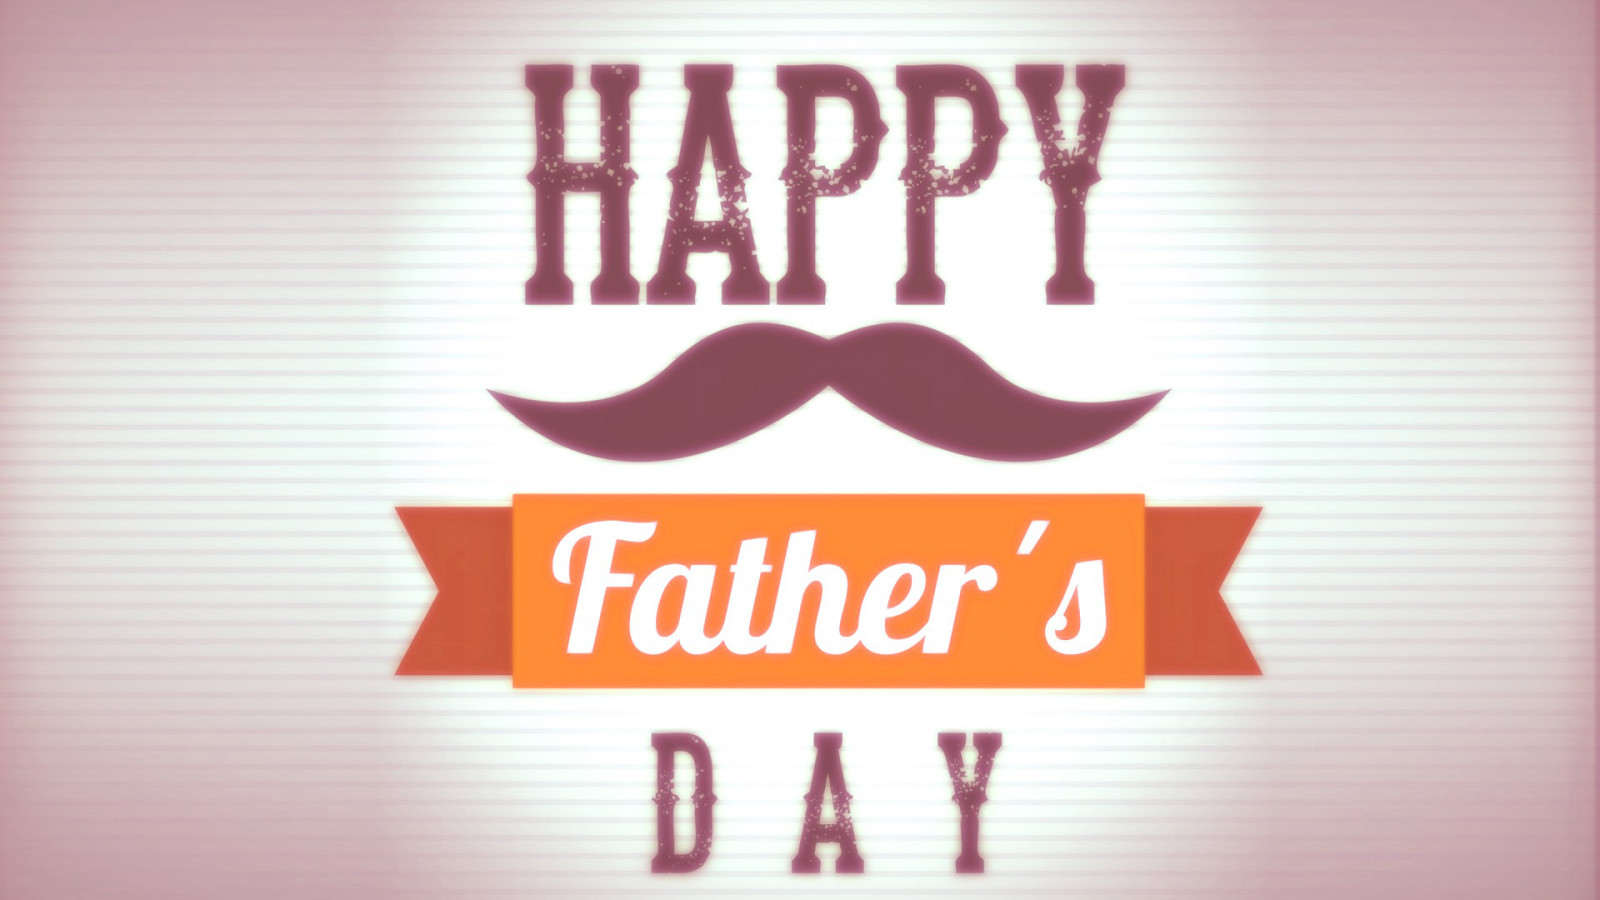 Happy Fathers Day 2018 Quotes Sayings Wishes Messages ...